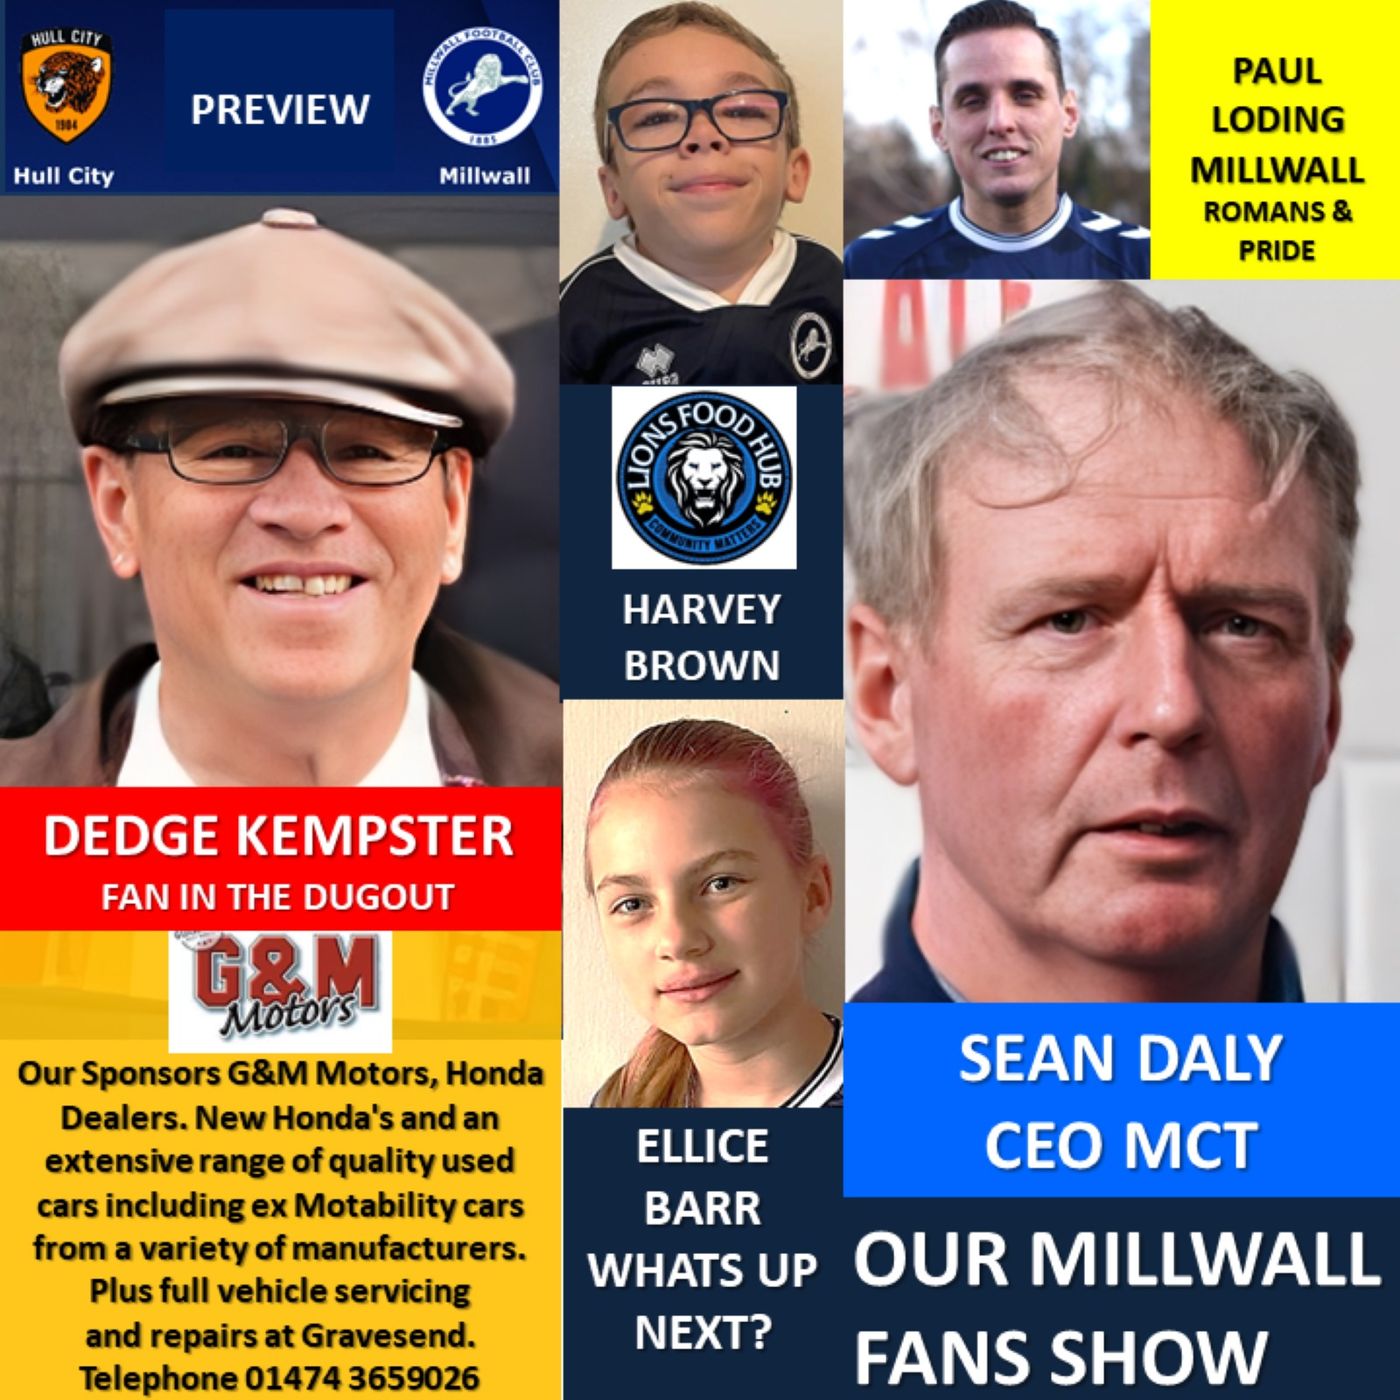 Our Millwall Fans Show - Sponsored by G&M Motors, Gravesend - 020224